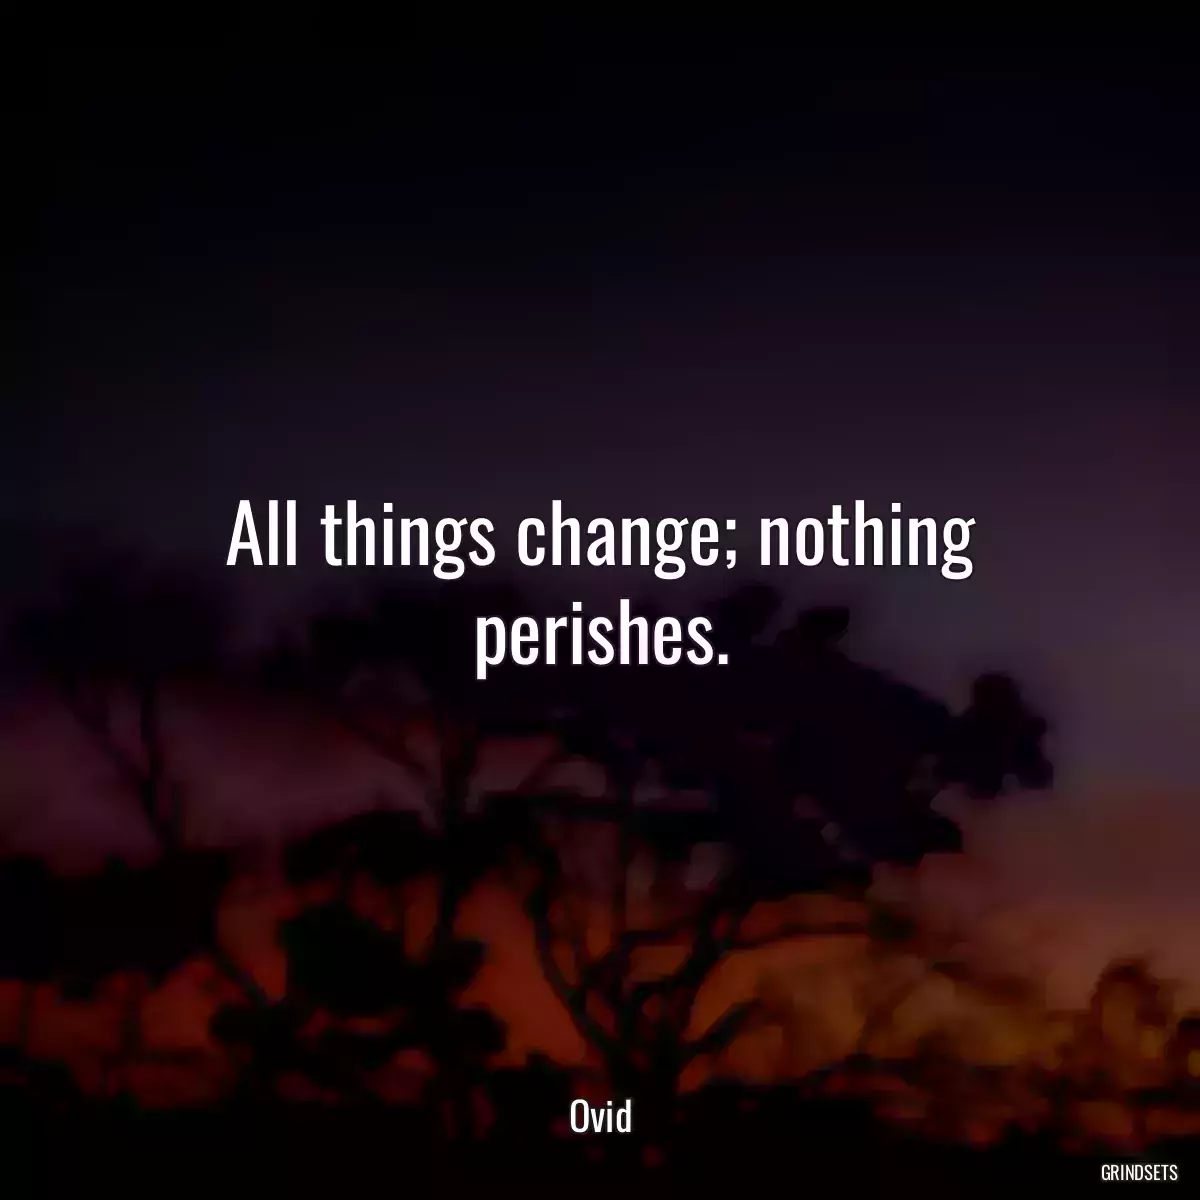 All things change; nothing perishes.